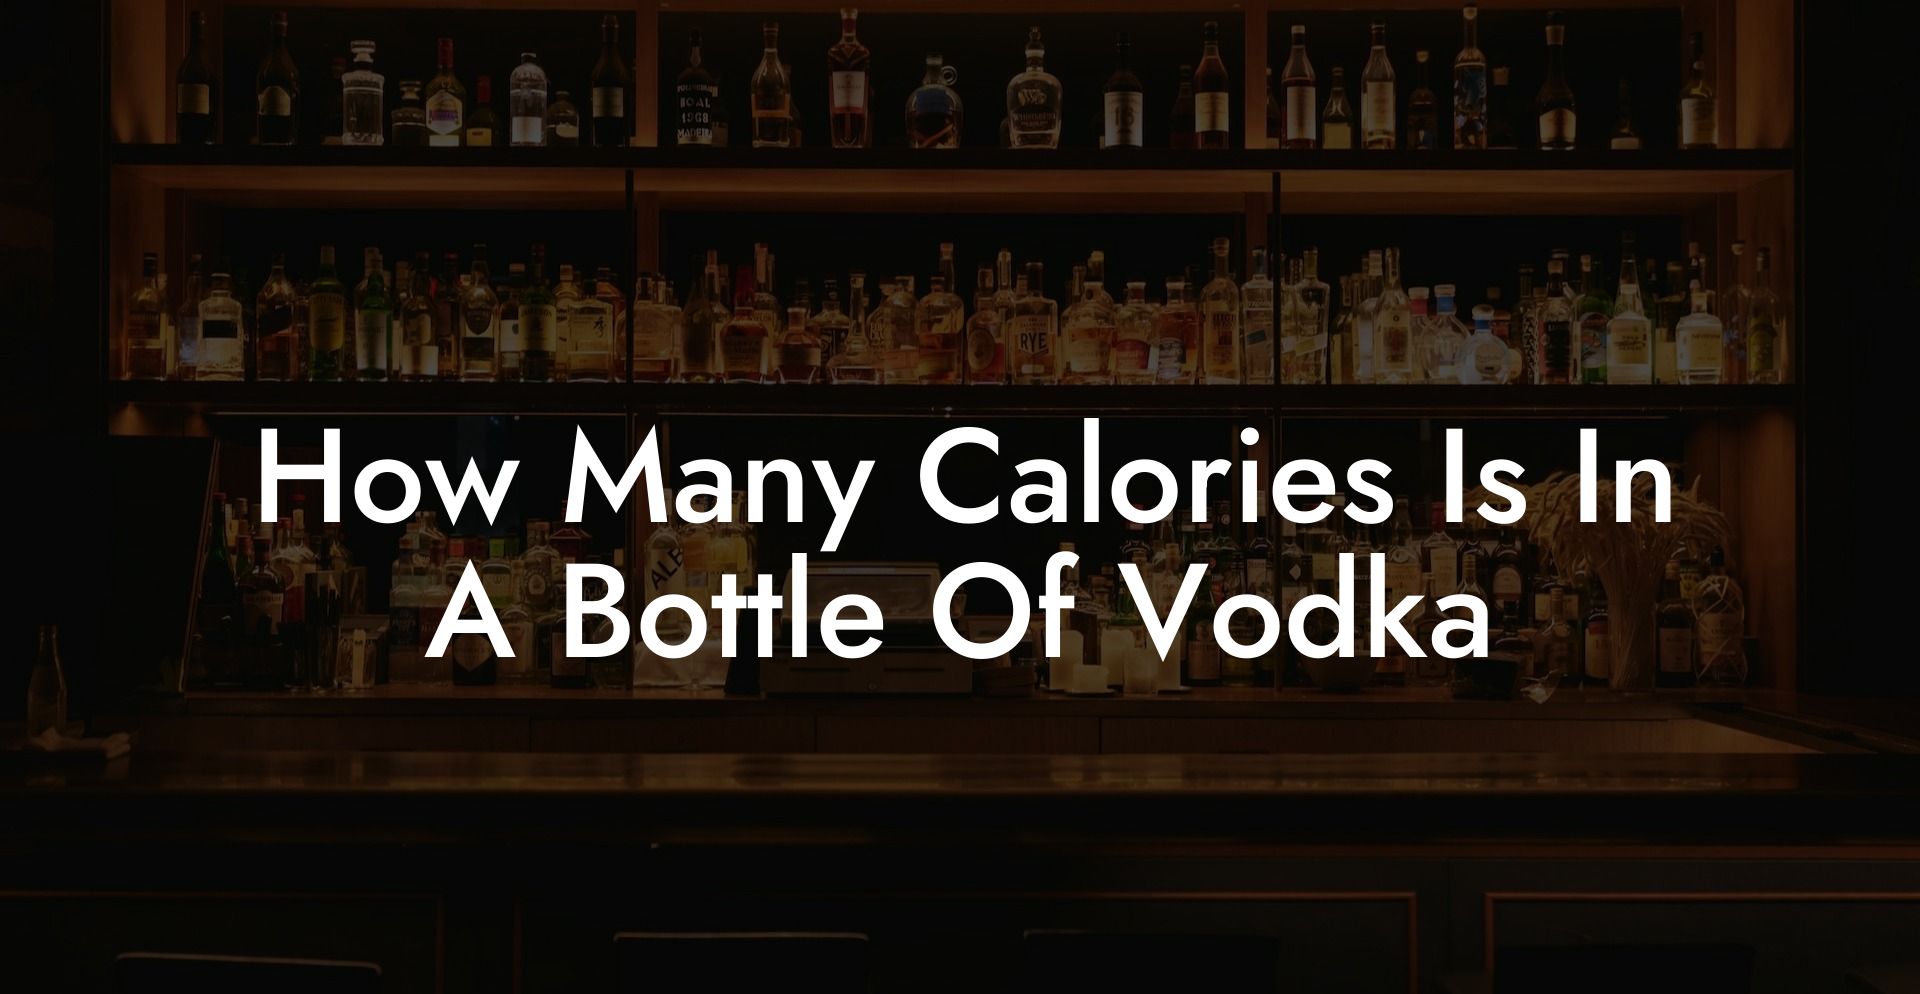 How Many Calories Is In A Bottle Of Vodka